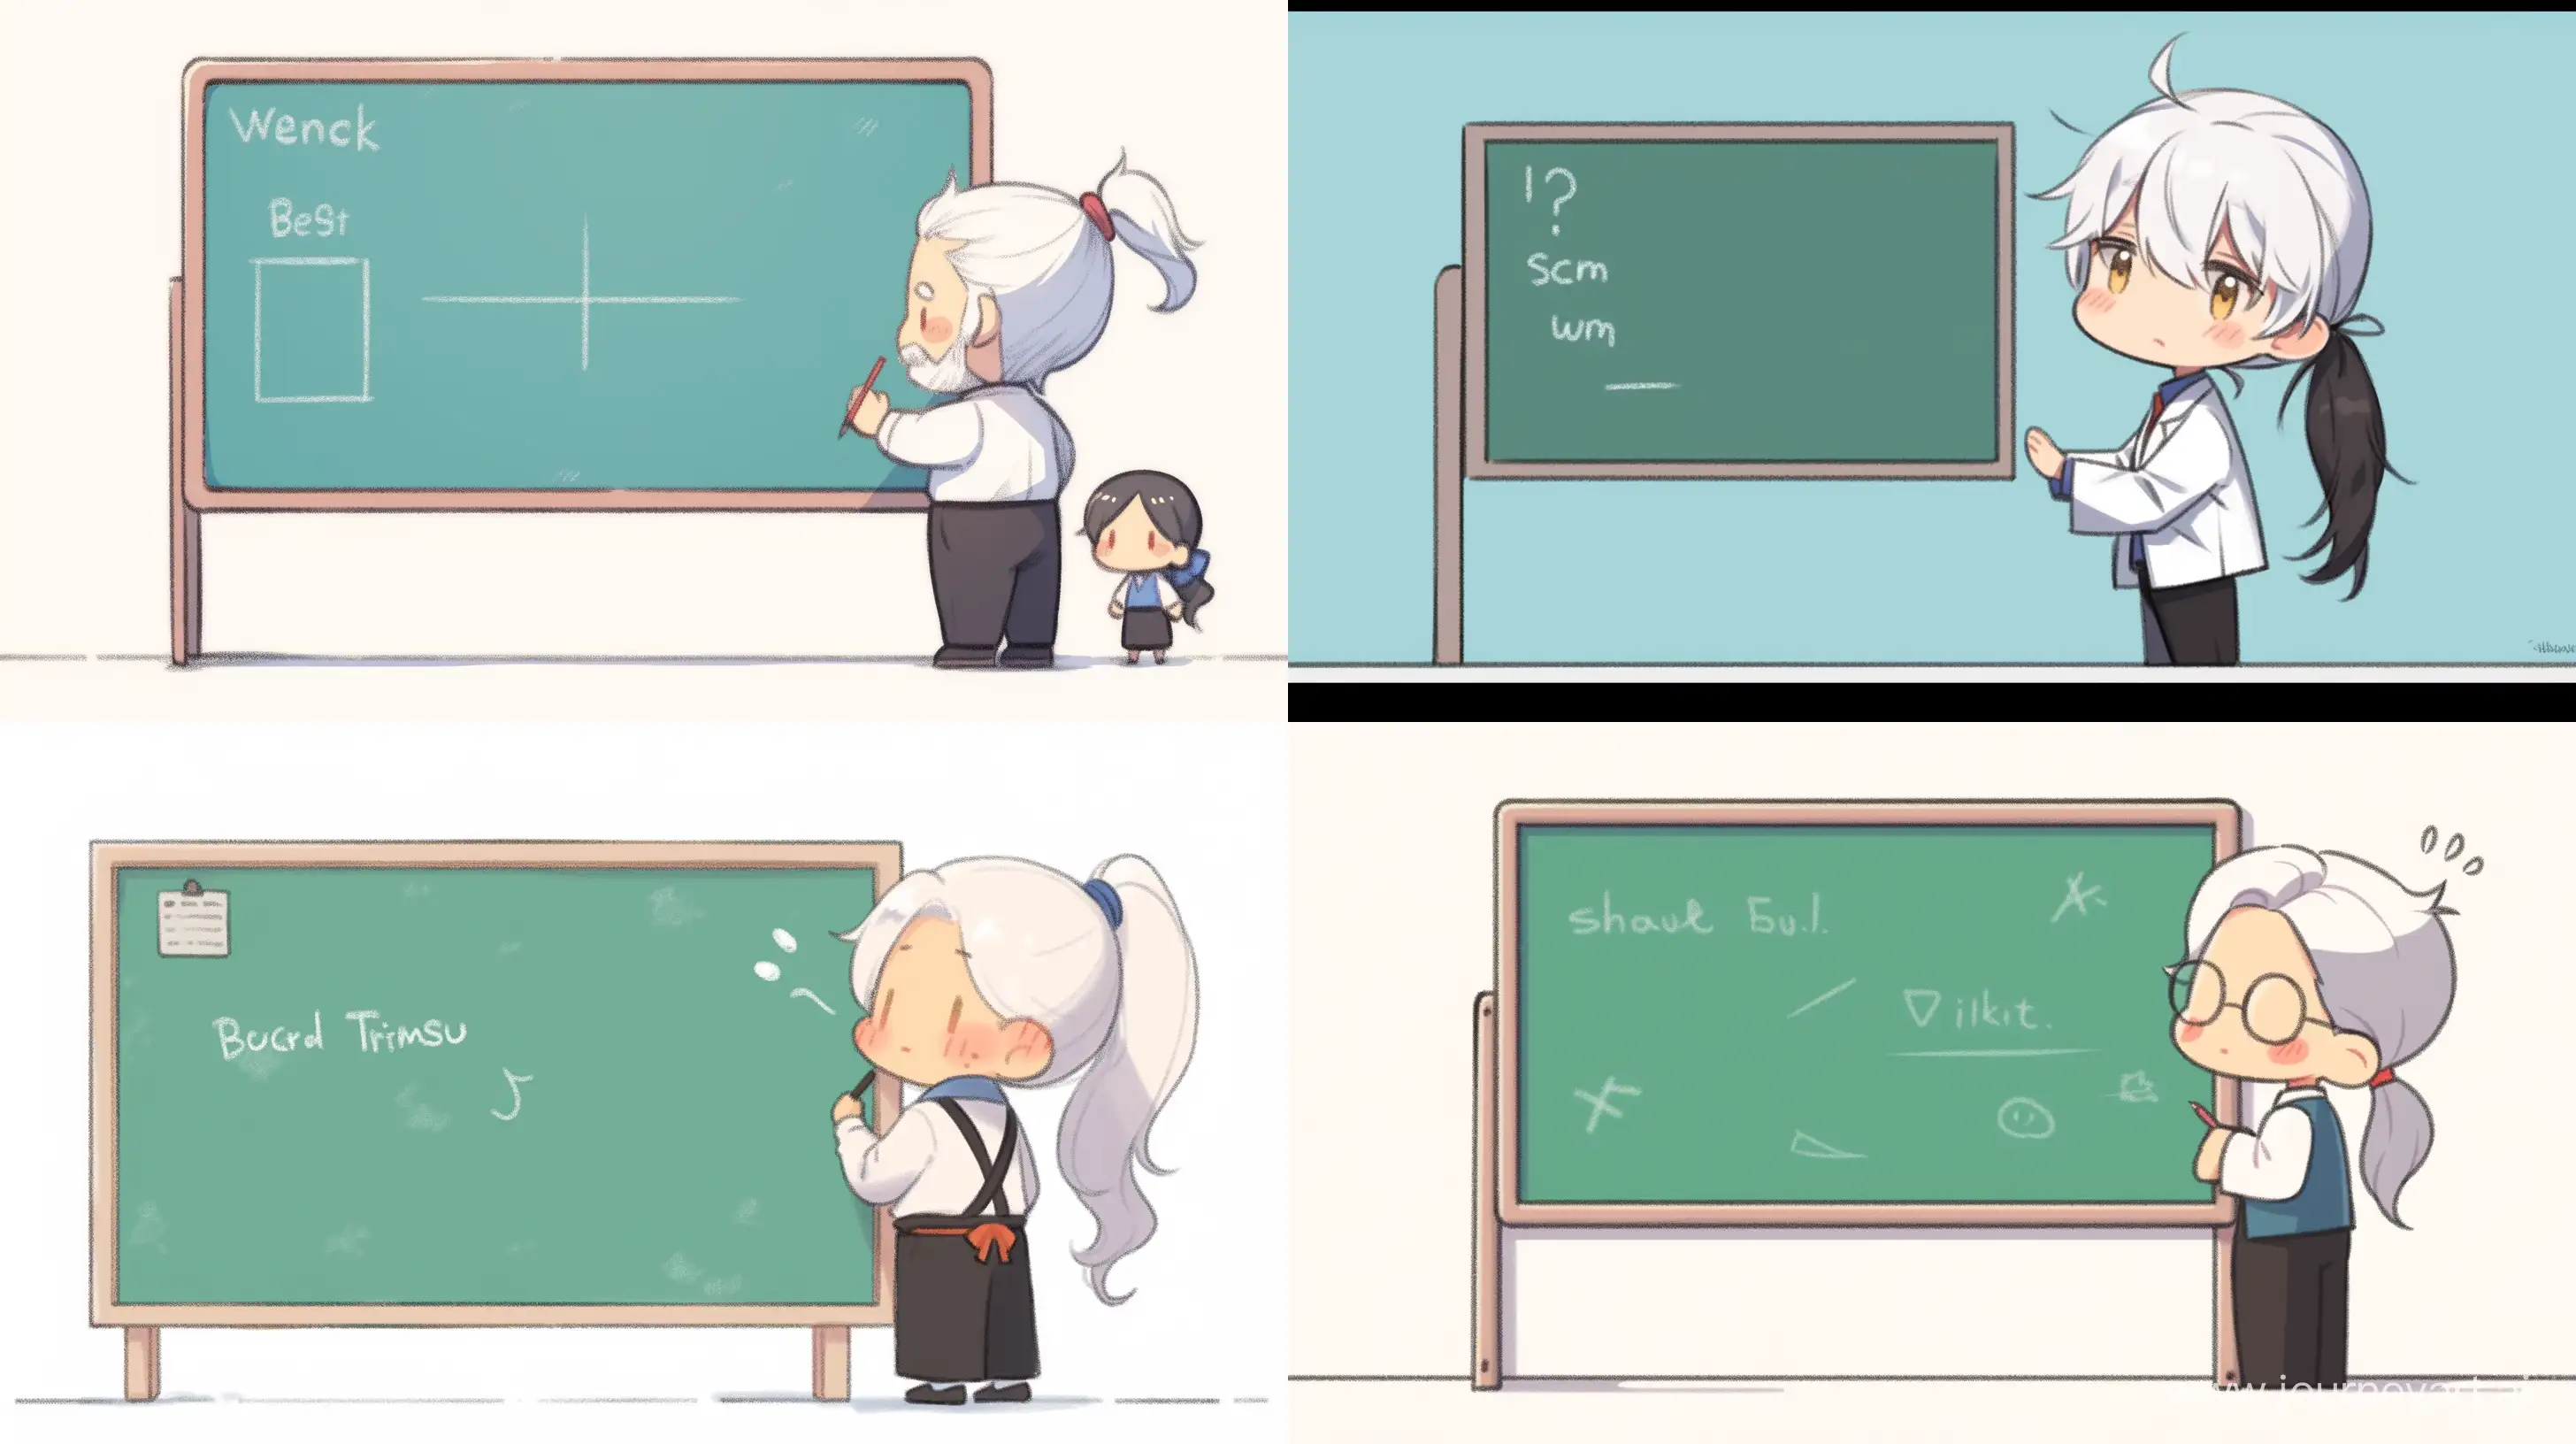 Chibi-Style-MiddleAged-Teacher-at-Chalkboard-Educational-Moment-with-White-Ponytail